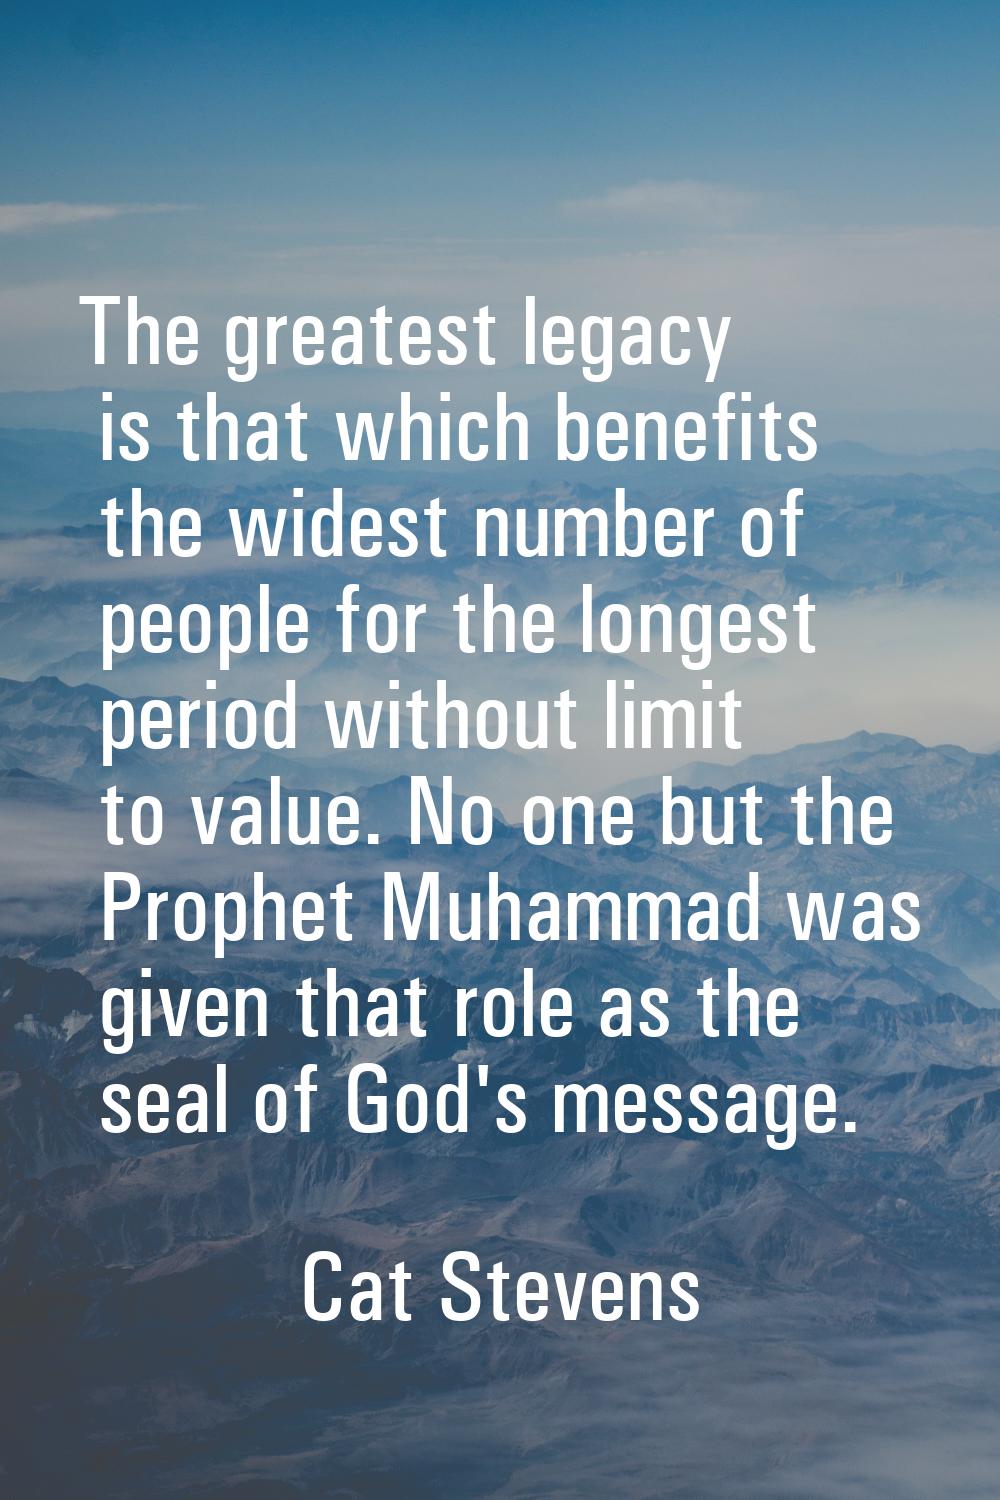 The greatest legacy is that which benefits the widest number of people for the longest period witho